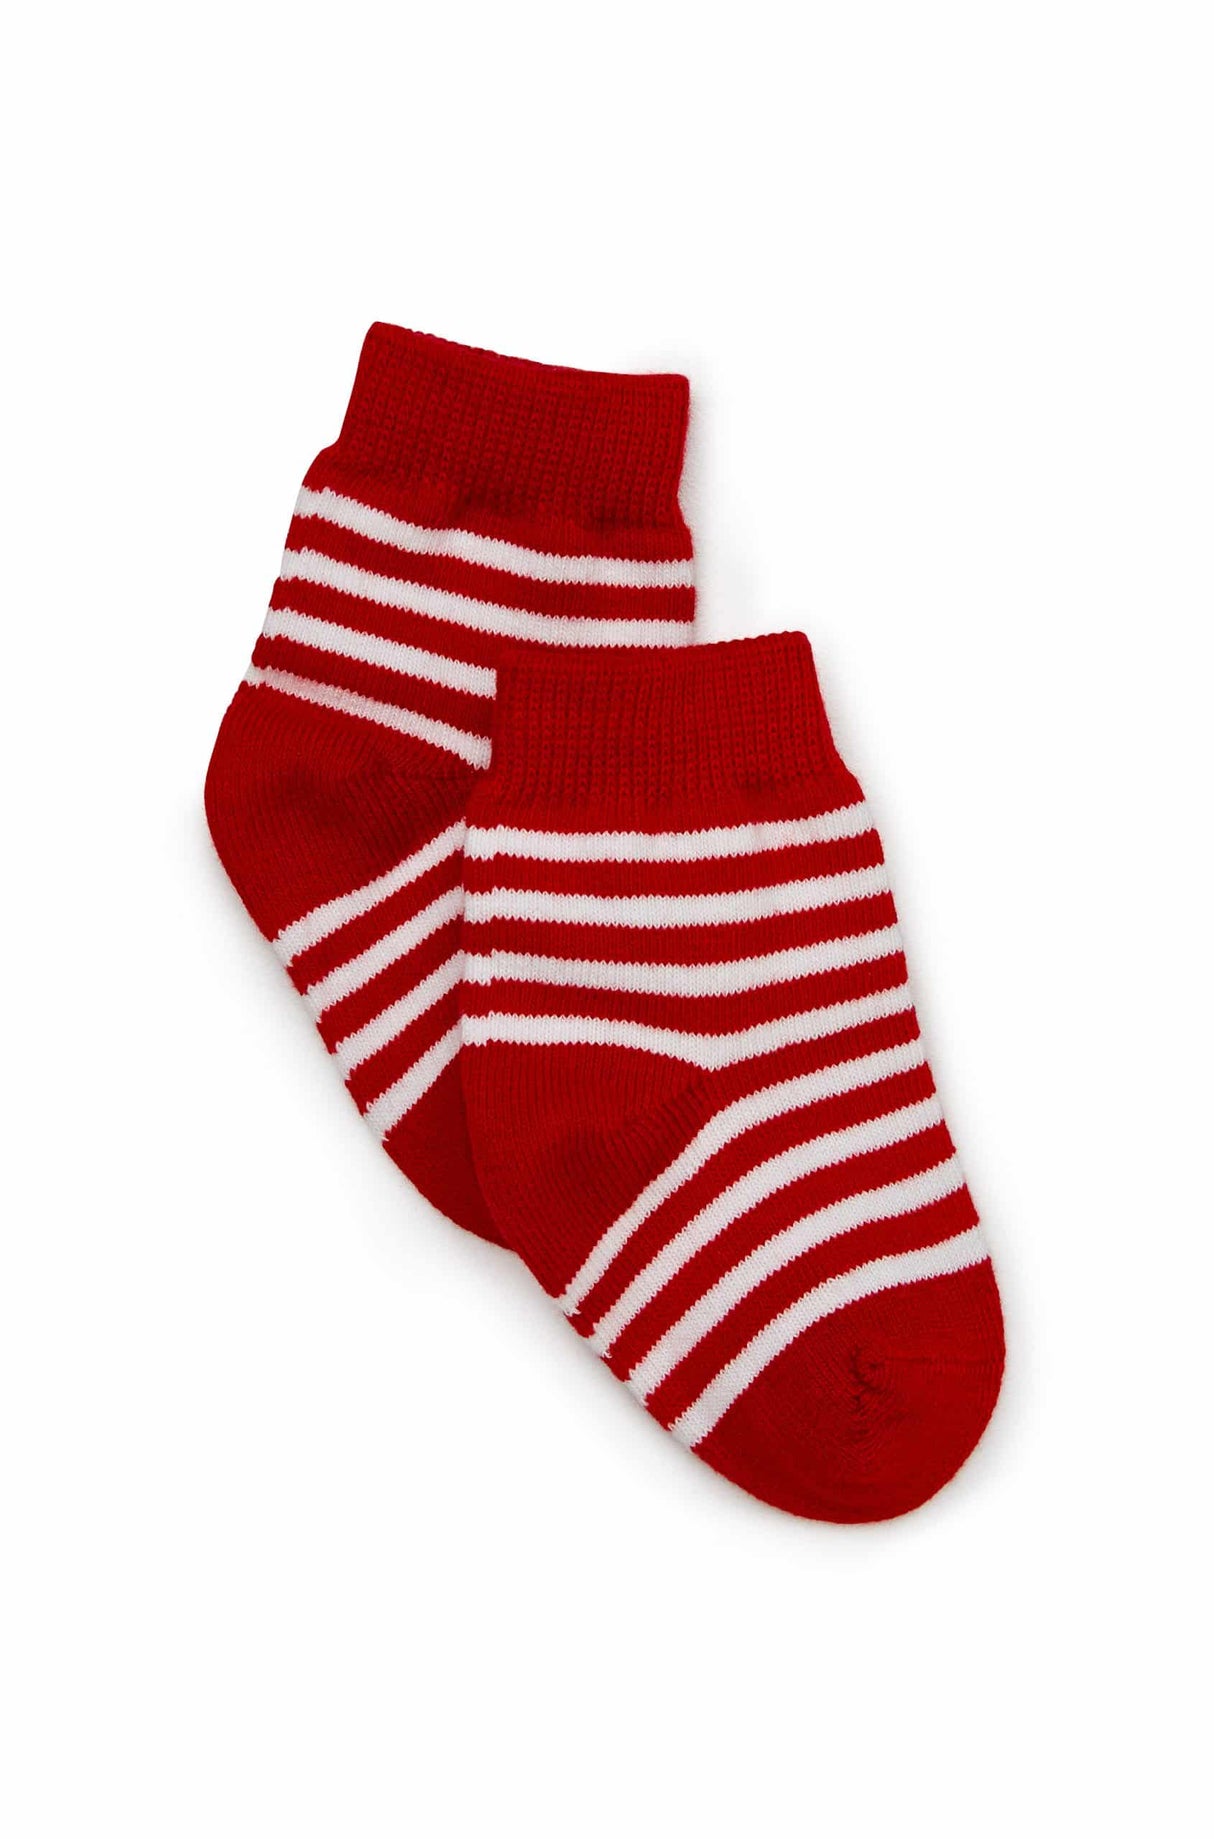 Red and White Stripe Knitted Socks 2 Pack